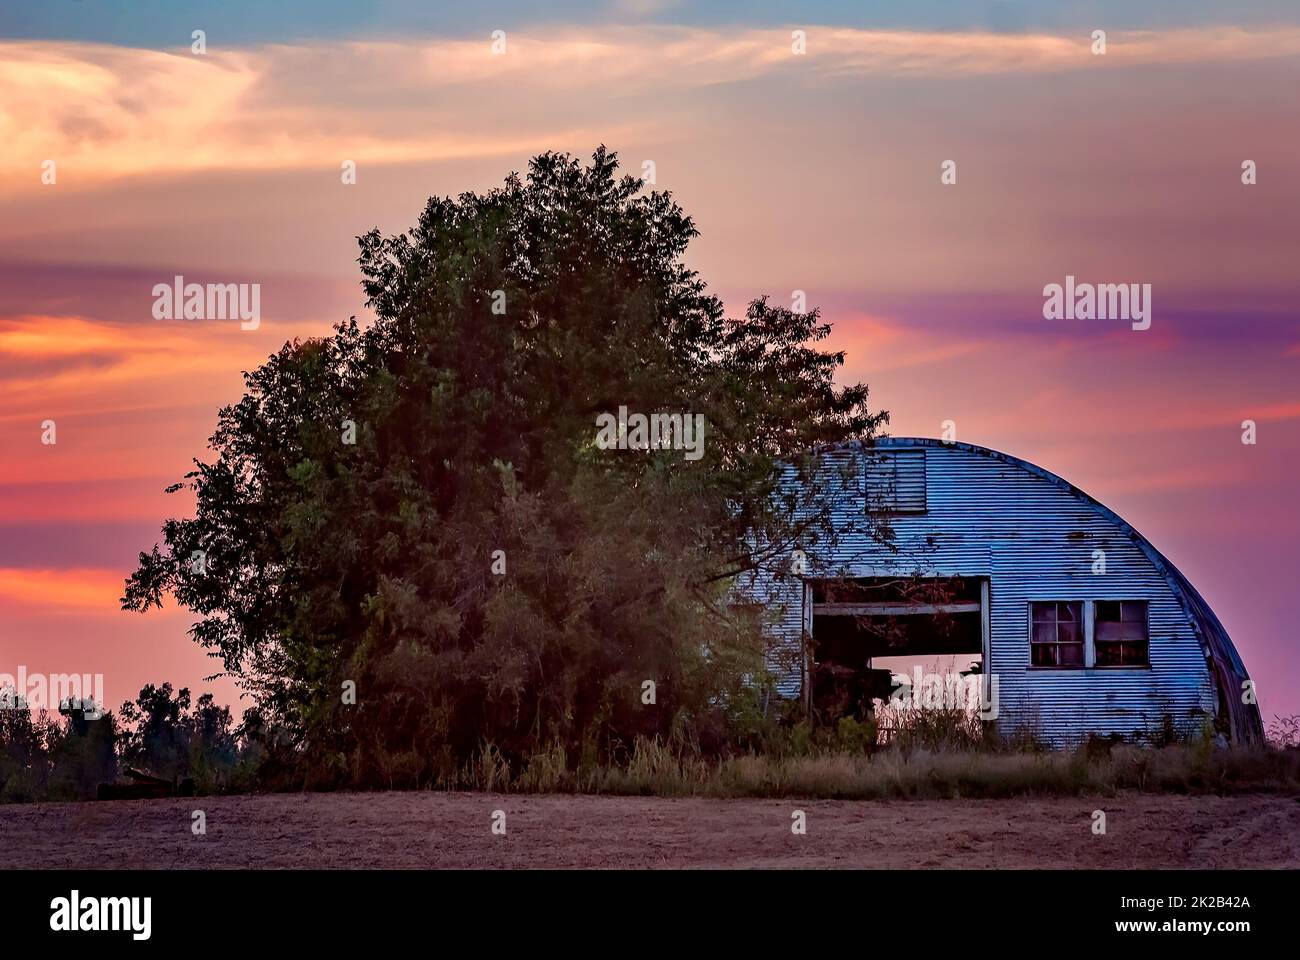 A dome-shaped metal barn is pictured at sunset, Oct. 17, 2010, in Union City, Tennessee. Obion County’s main occupation is agriculture. Stock Photo